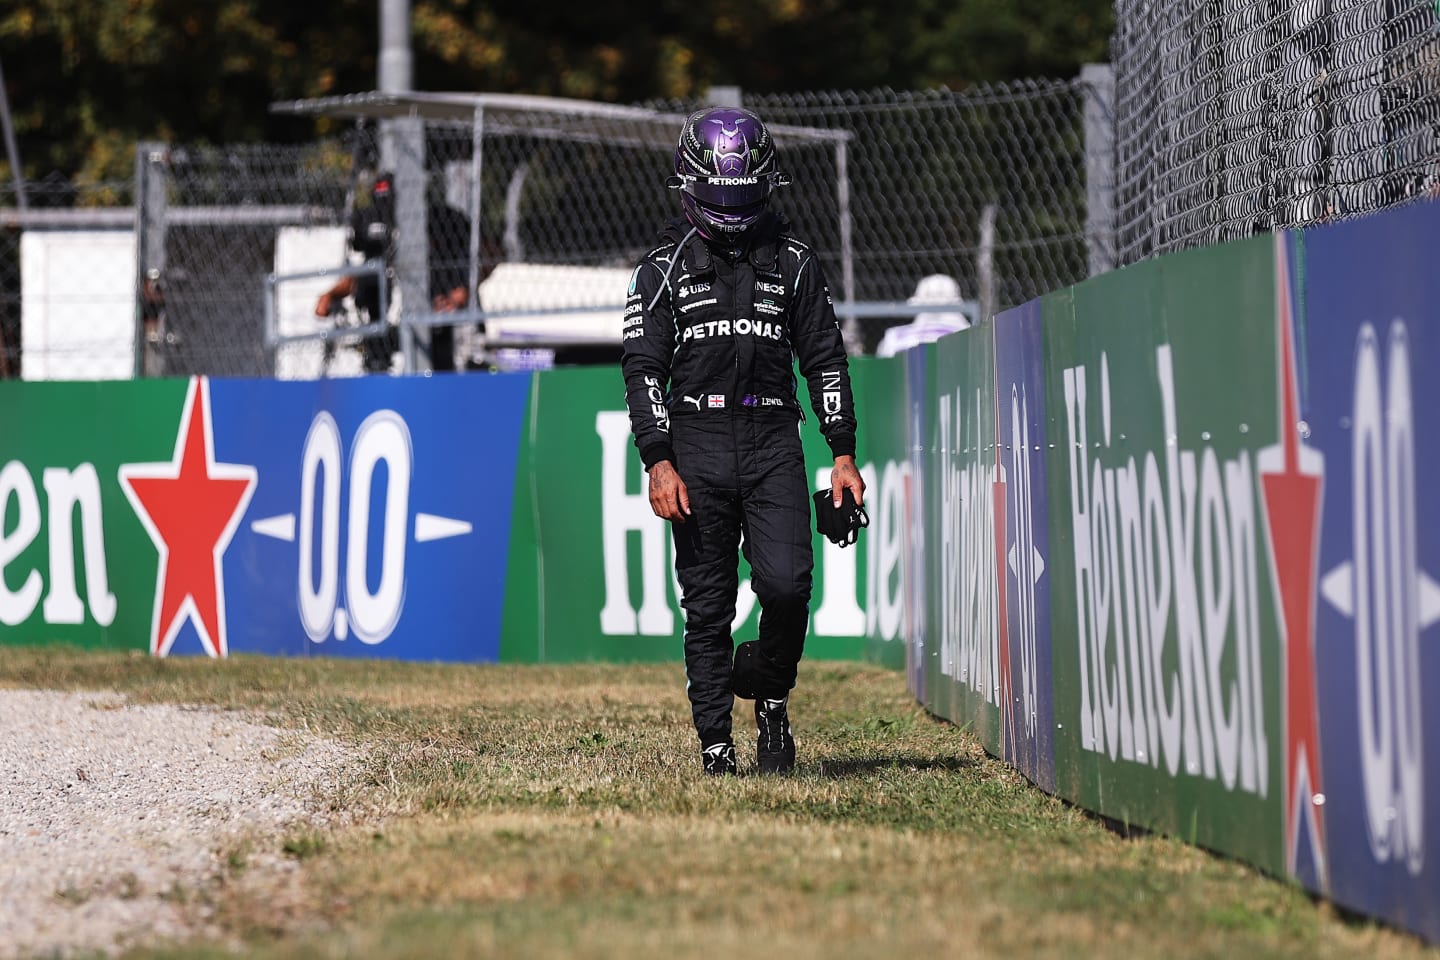 MONZA, ITALY - SEPTEMBER 12: Lewis Hamilton of Great Britain and Mercedes GP walks back to the pits